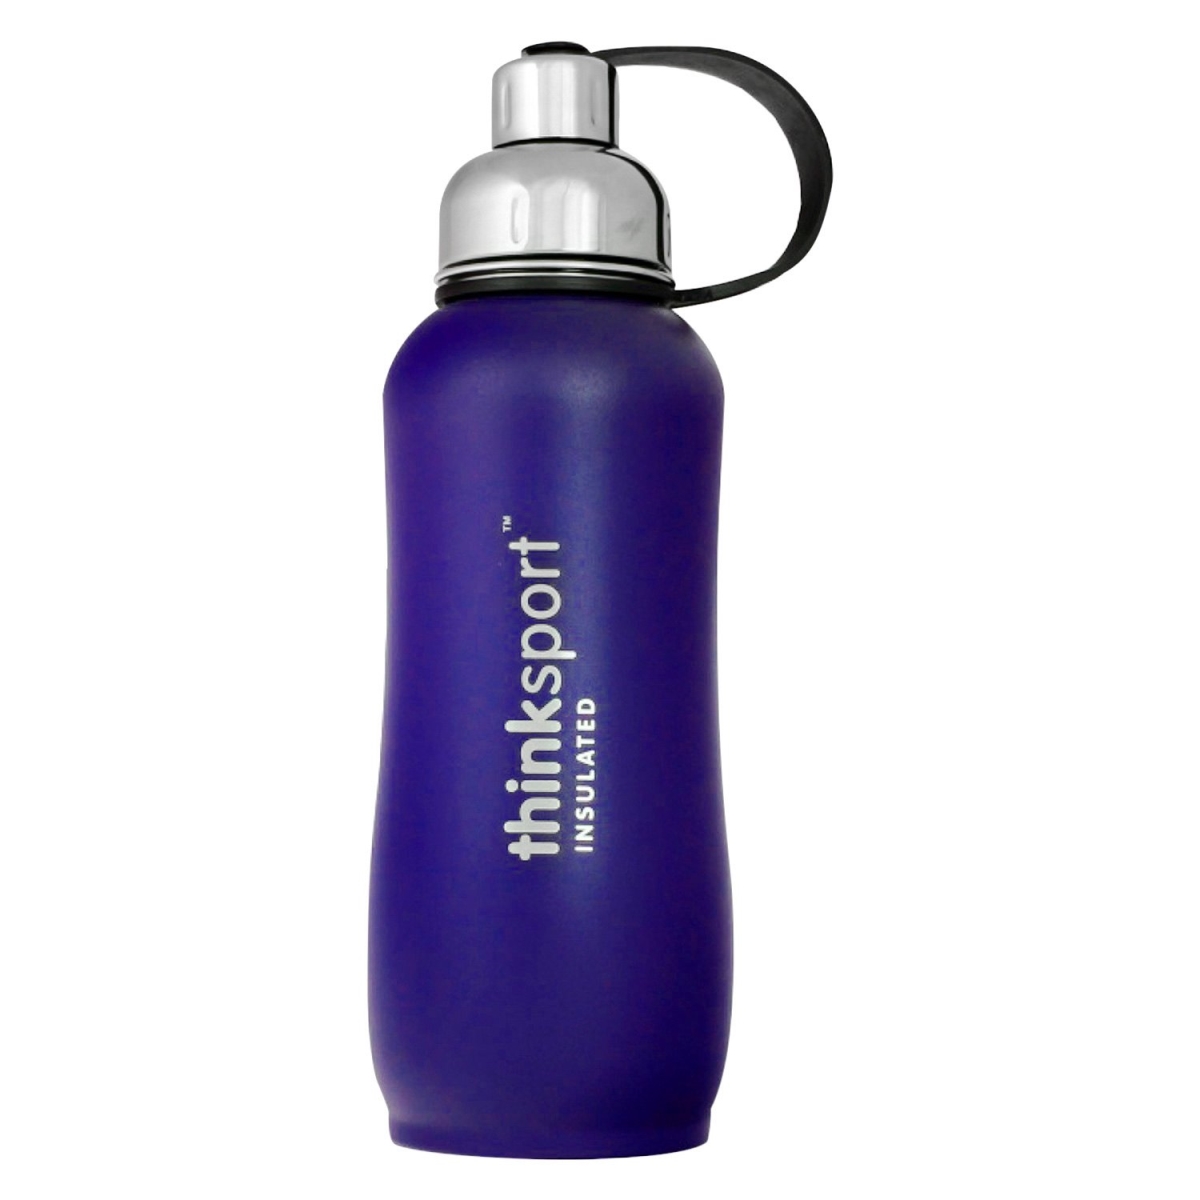 2035061 25 Oz Insulated Sports Bottle, Blue